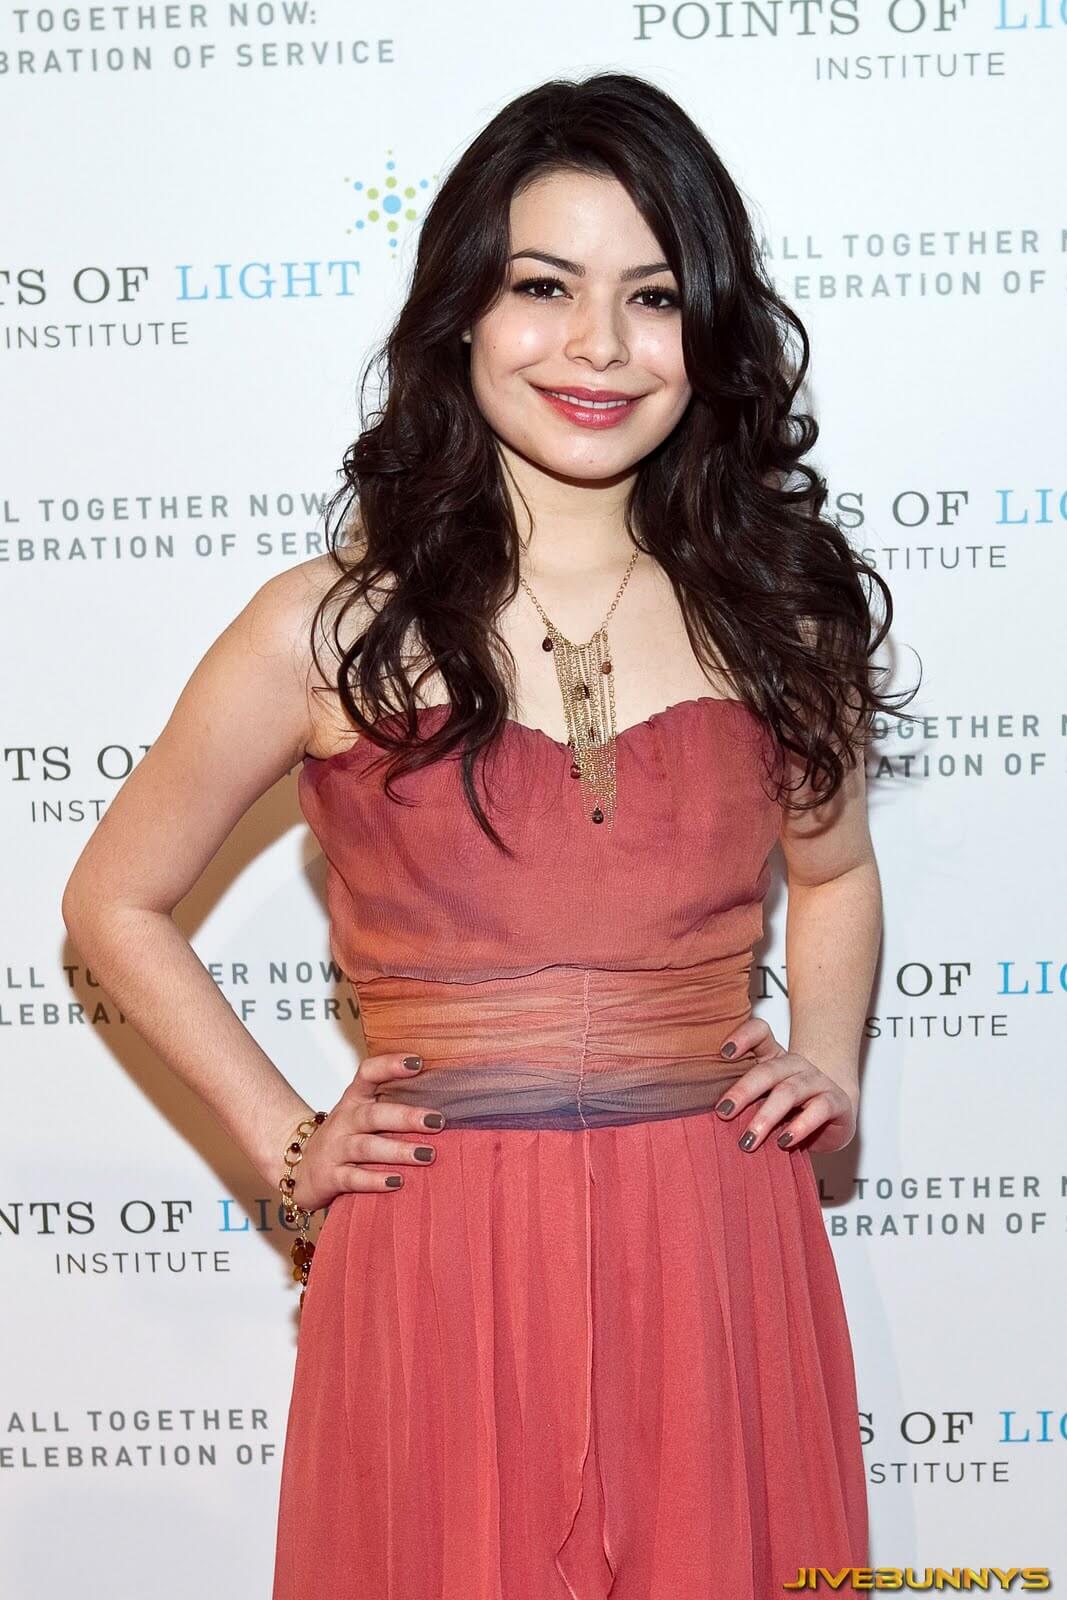 49 Miranda Cosgrove Nude Pictures Which Are Sure To Keep You Charmed With Her Charisma 7